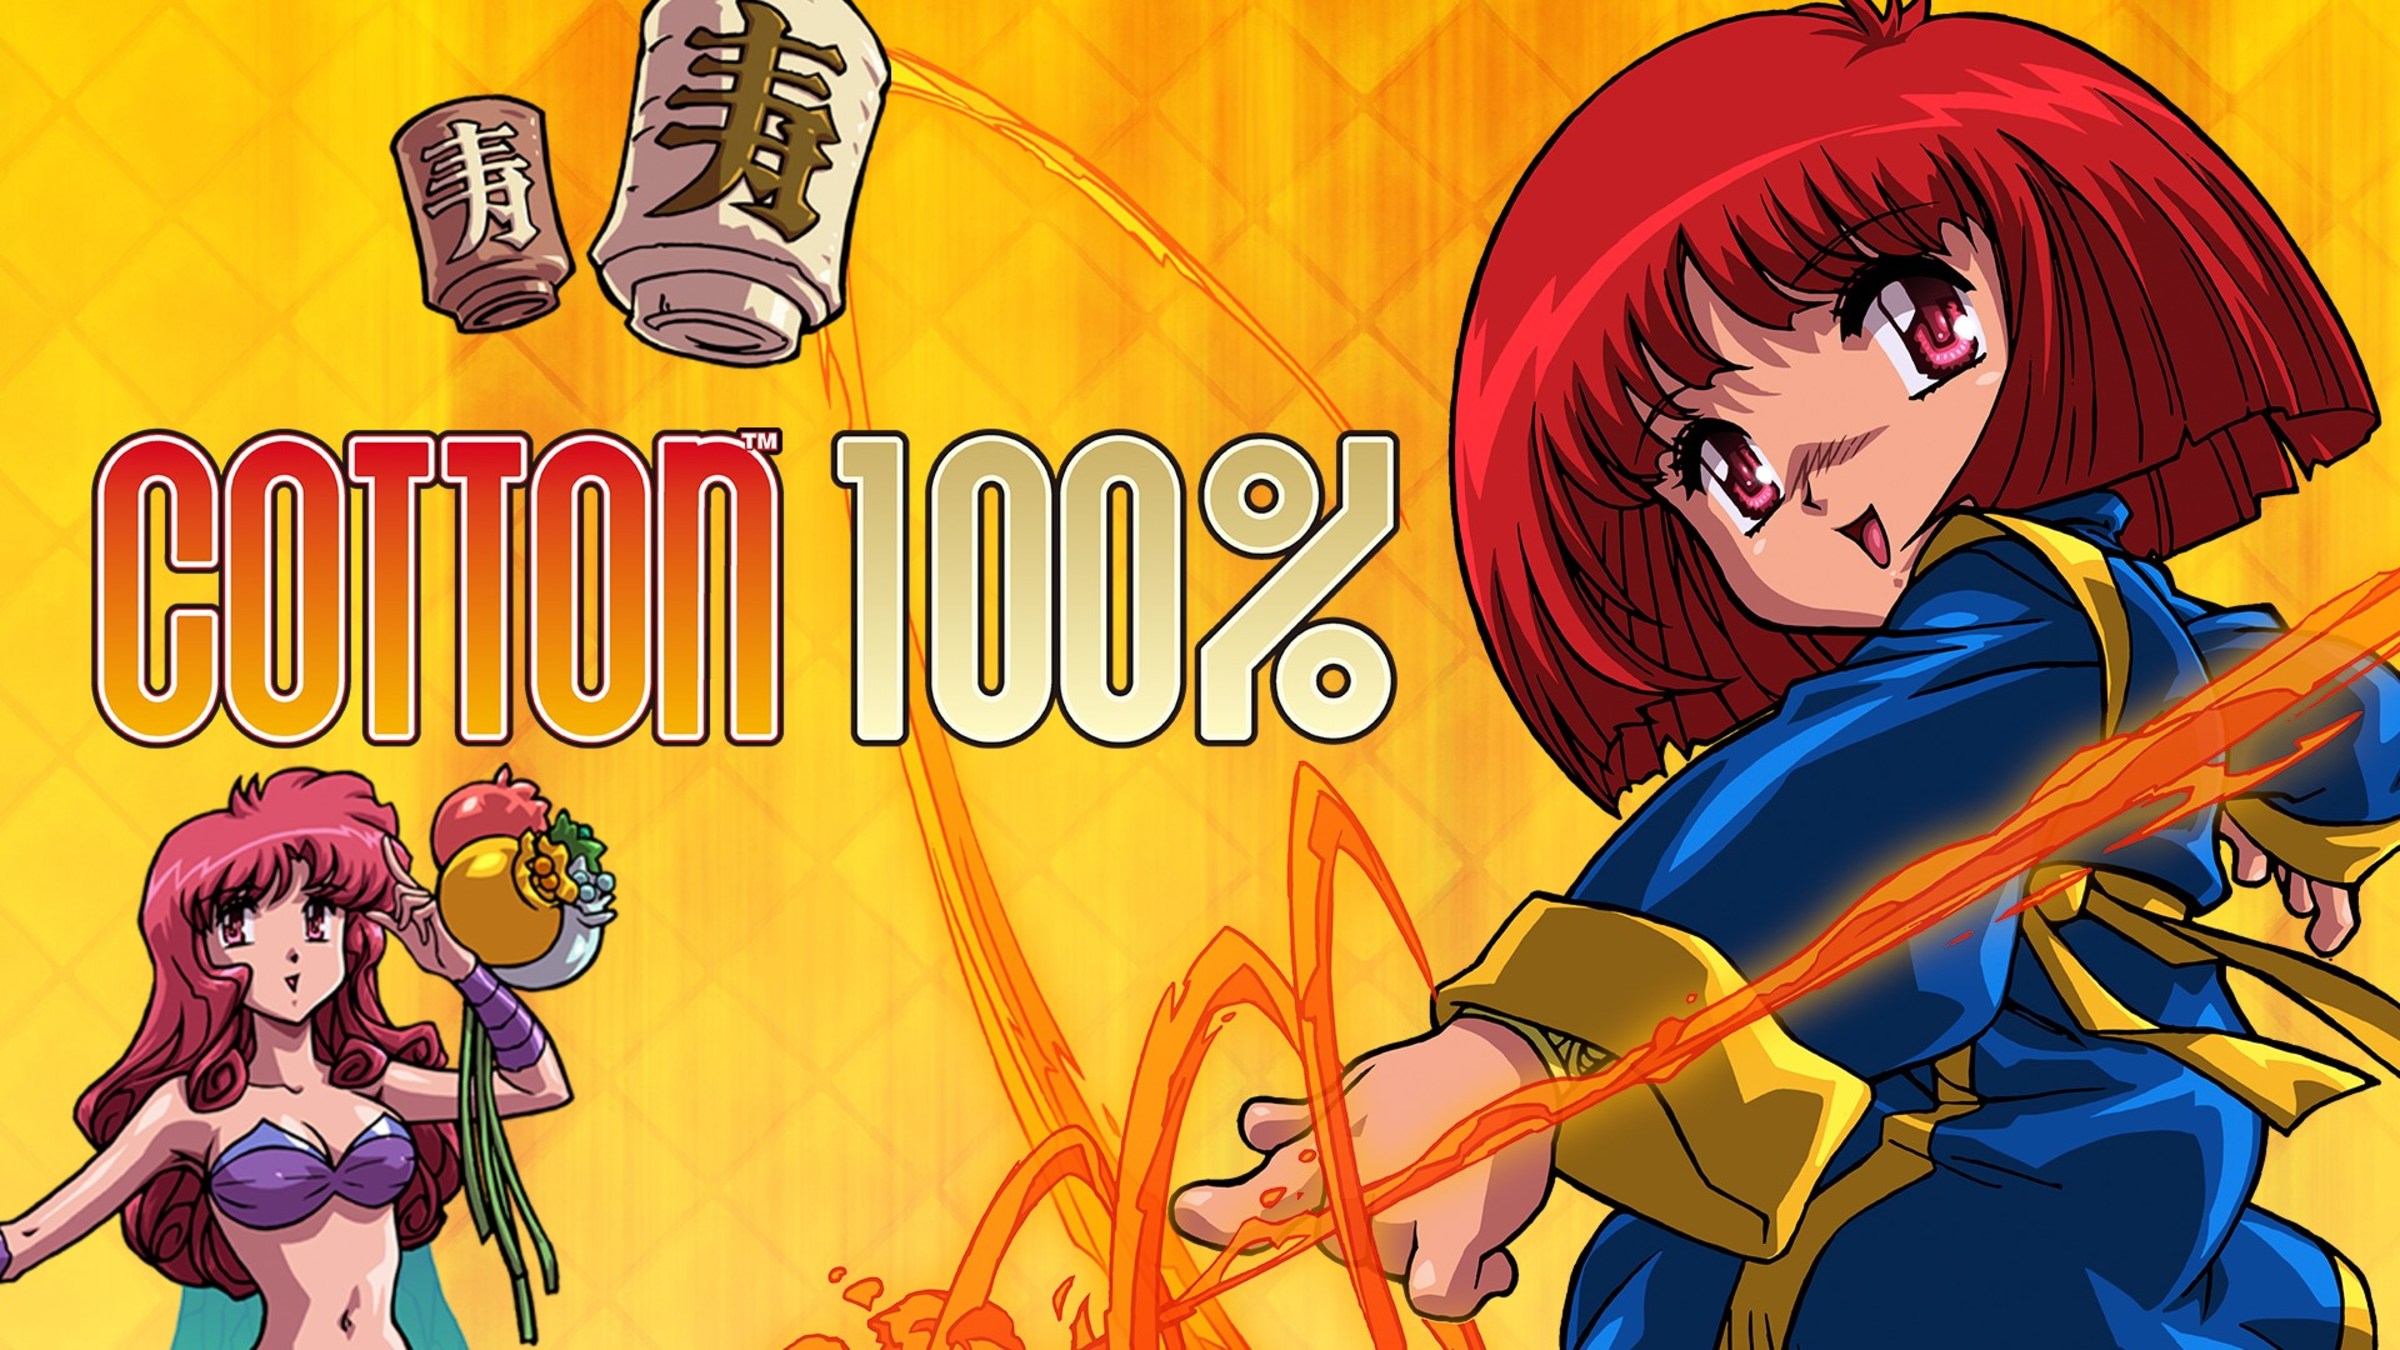 Cotton 100% for Nintendo Switch - Nintendo Official Site